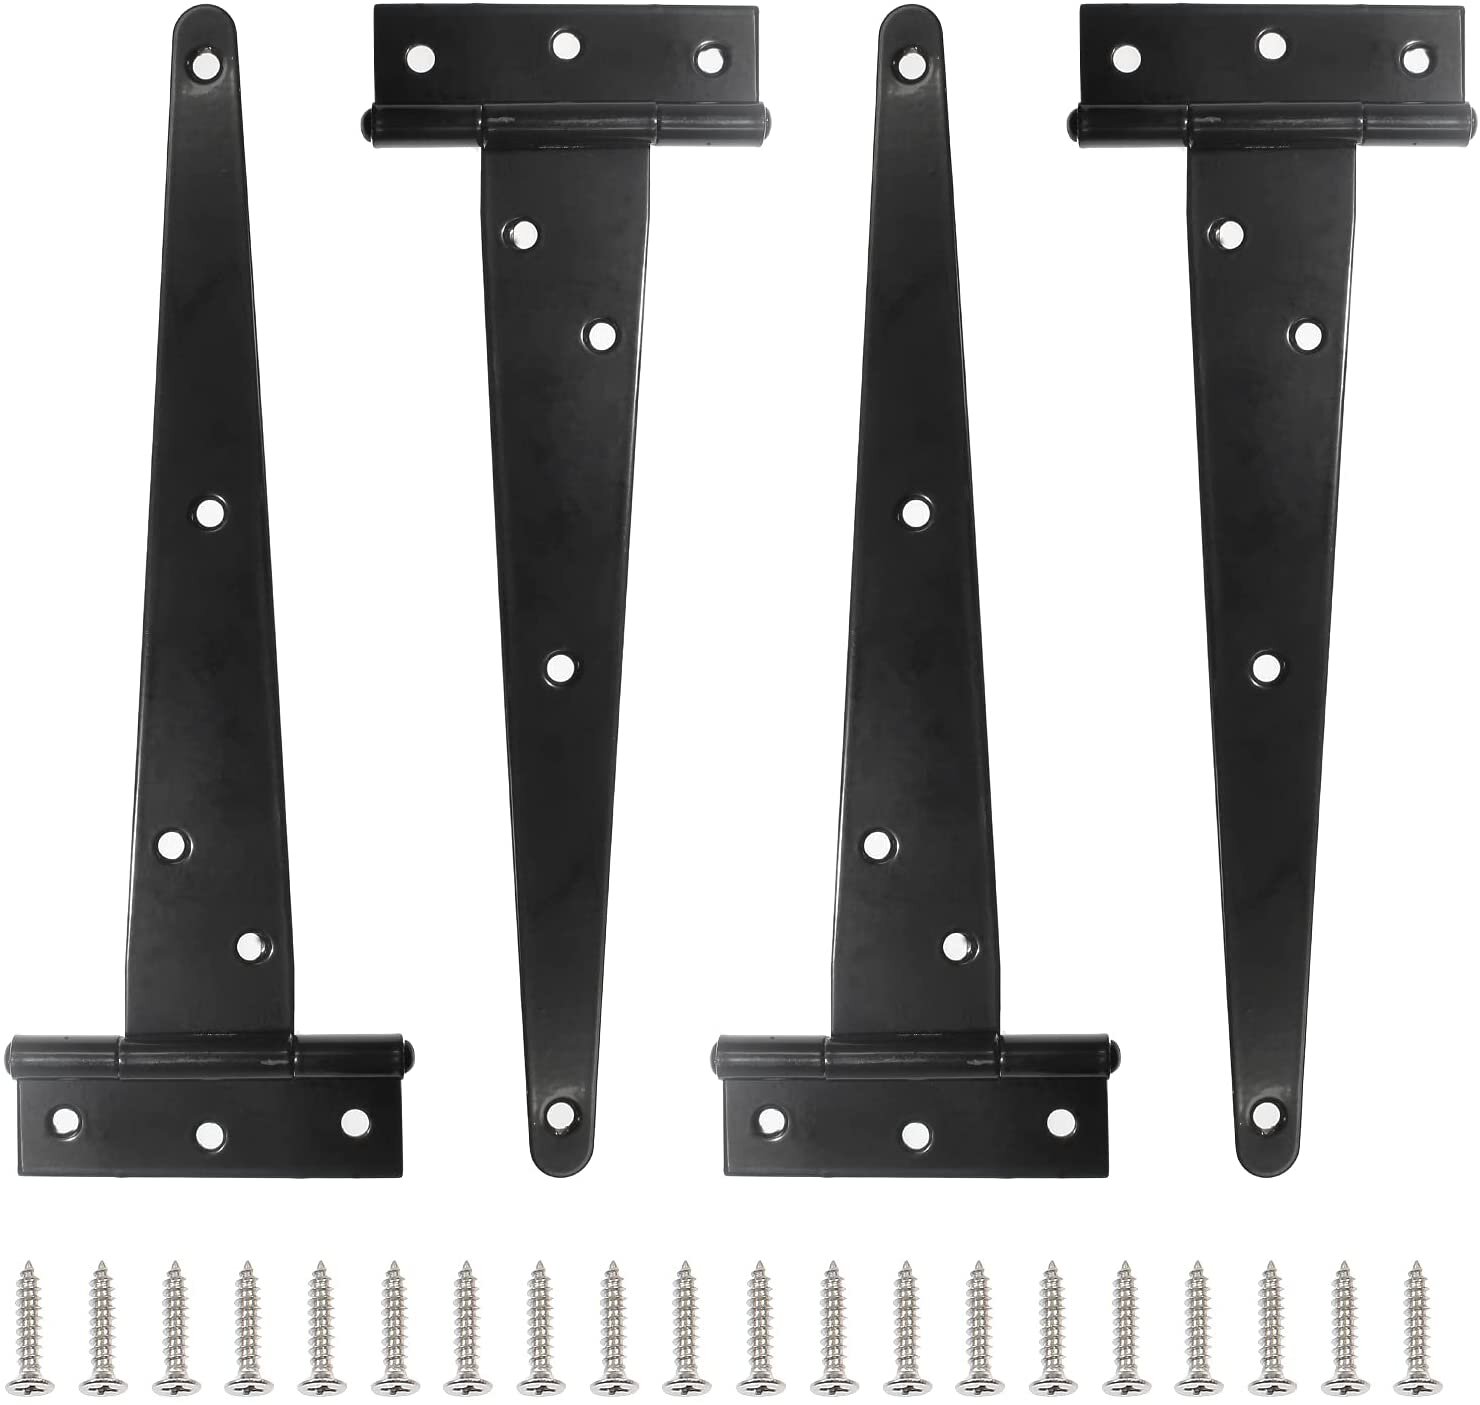 2 Pcs Iron Tee Hinges Black Heavy Duty Strap Cabinet Hinge Garden Shed Gate